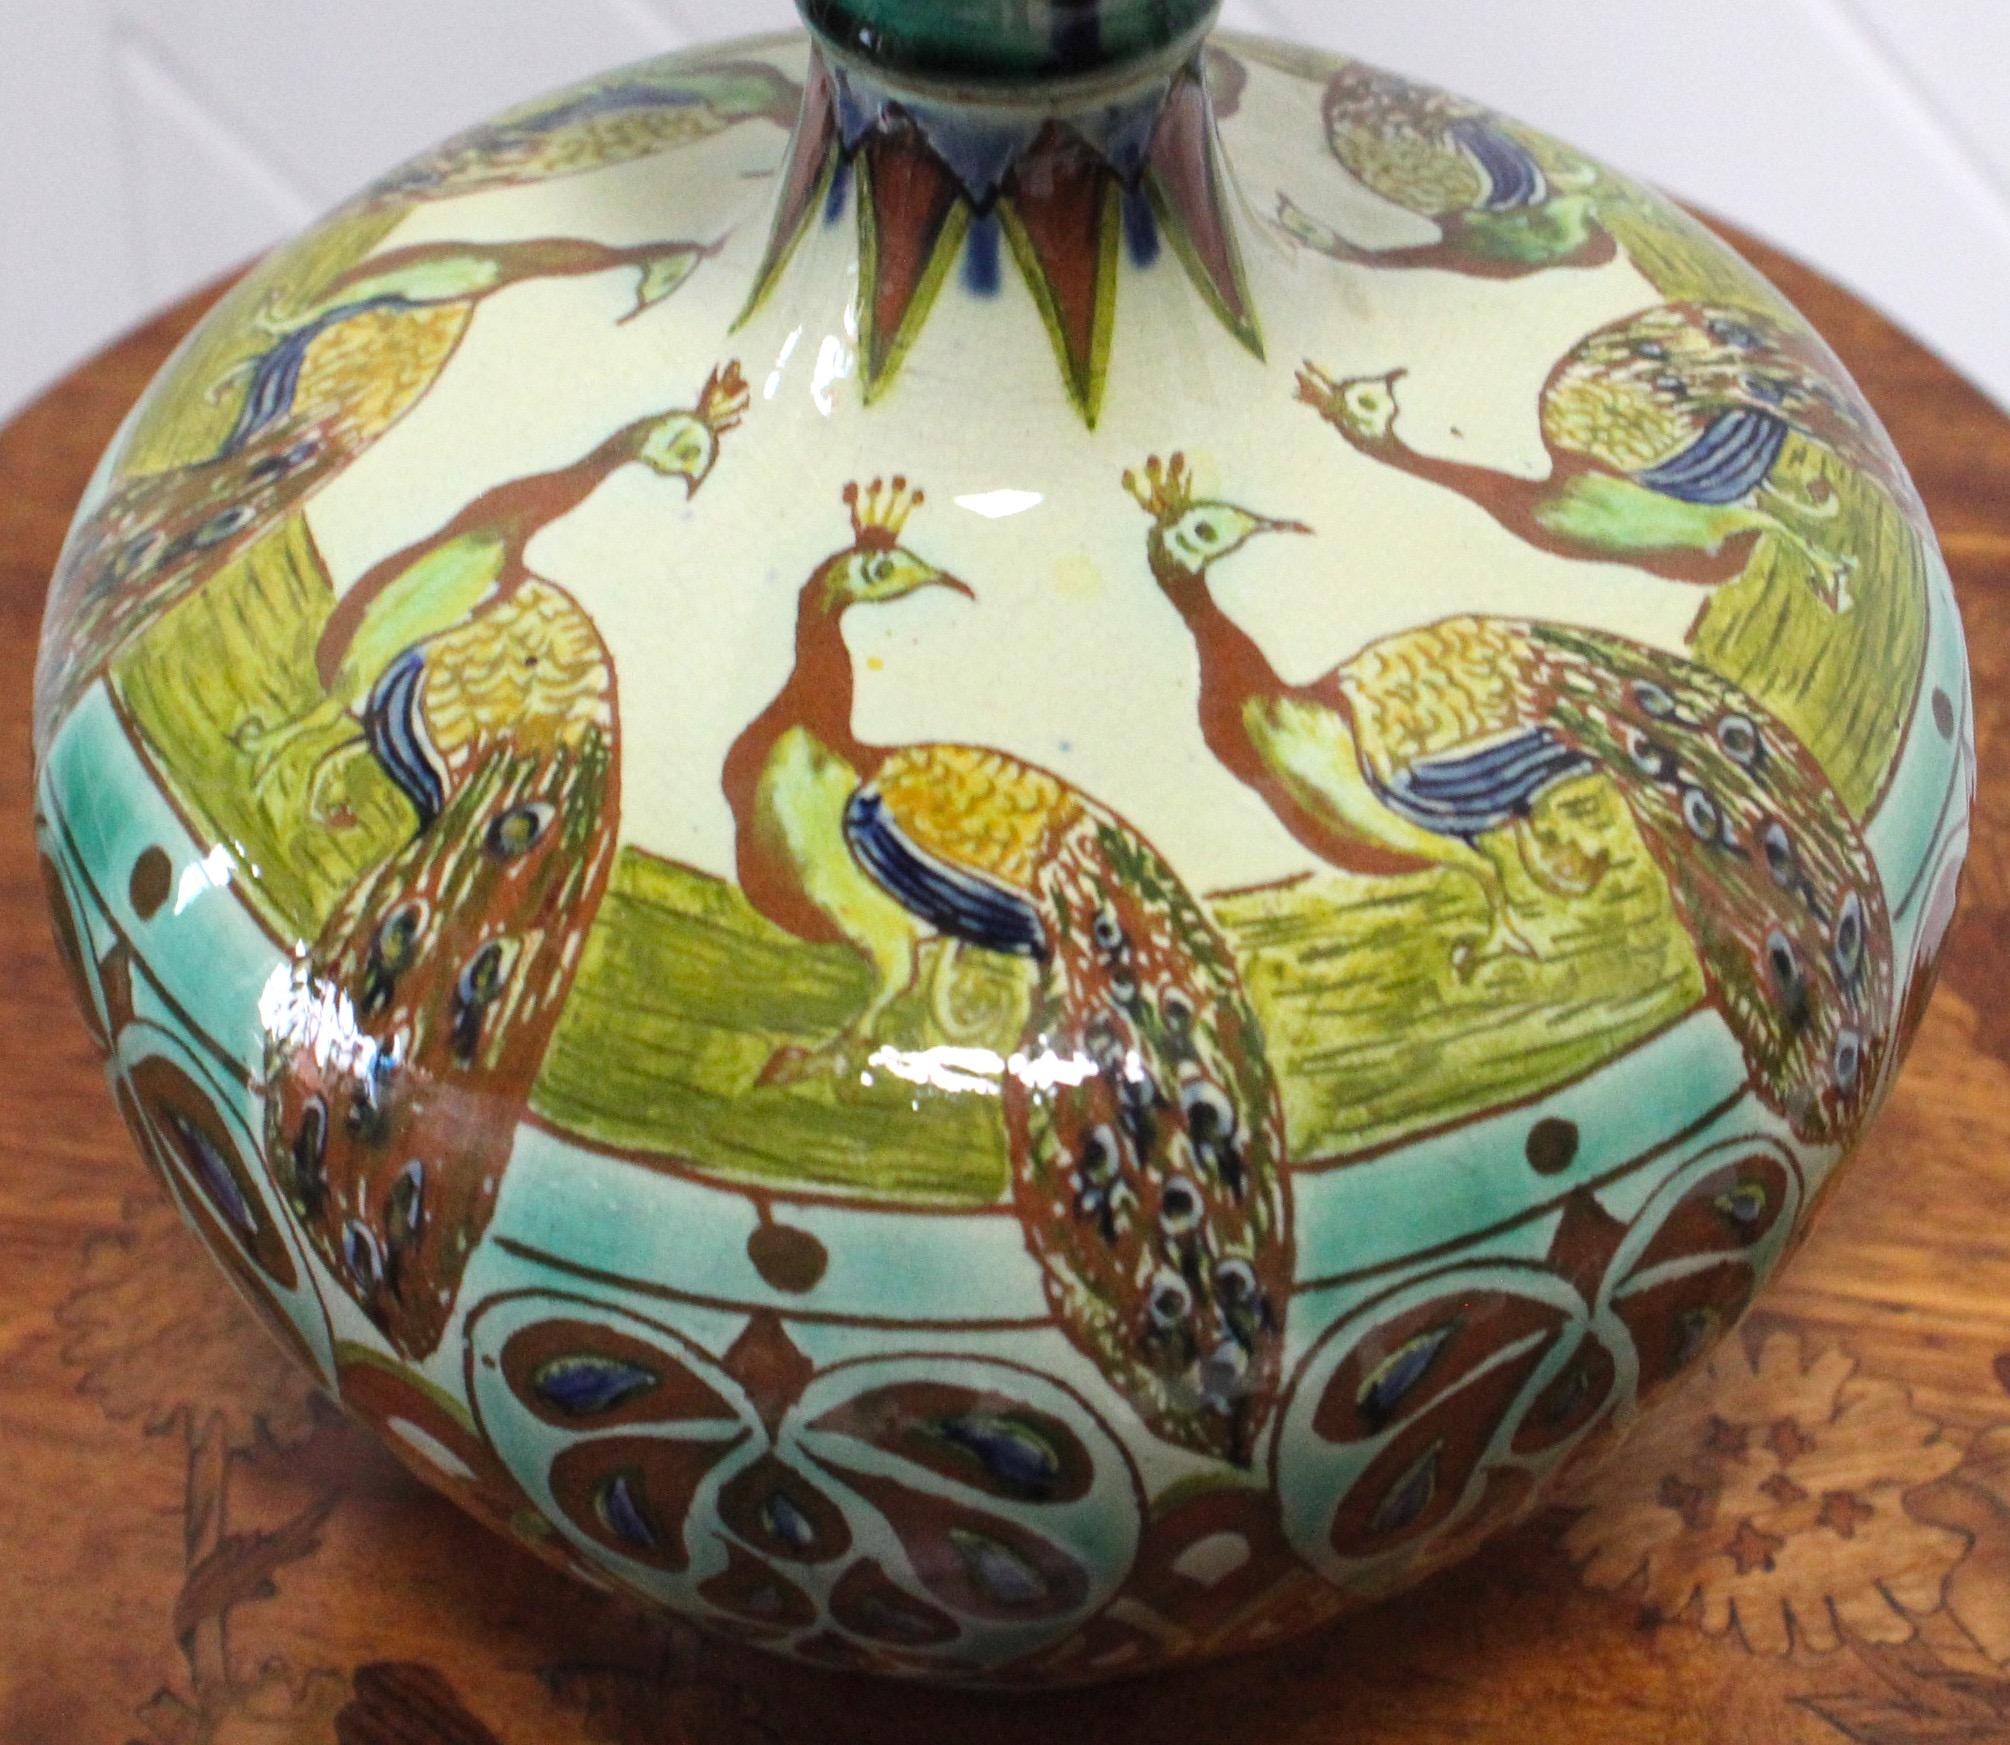 Extremely rare Arts and Crafts Dutch shaped vase with original lid
Depicting peacocks
This vase is Signed JS - probably Jessie Sinclair
It has been coloured by HJ - Hannah Jones
Made by Della Robbia 
Circa 1898
Please see image of the vase